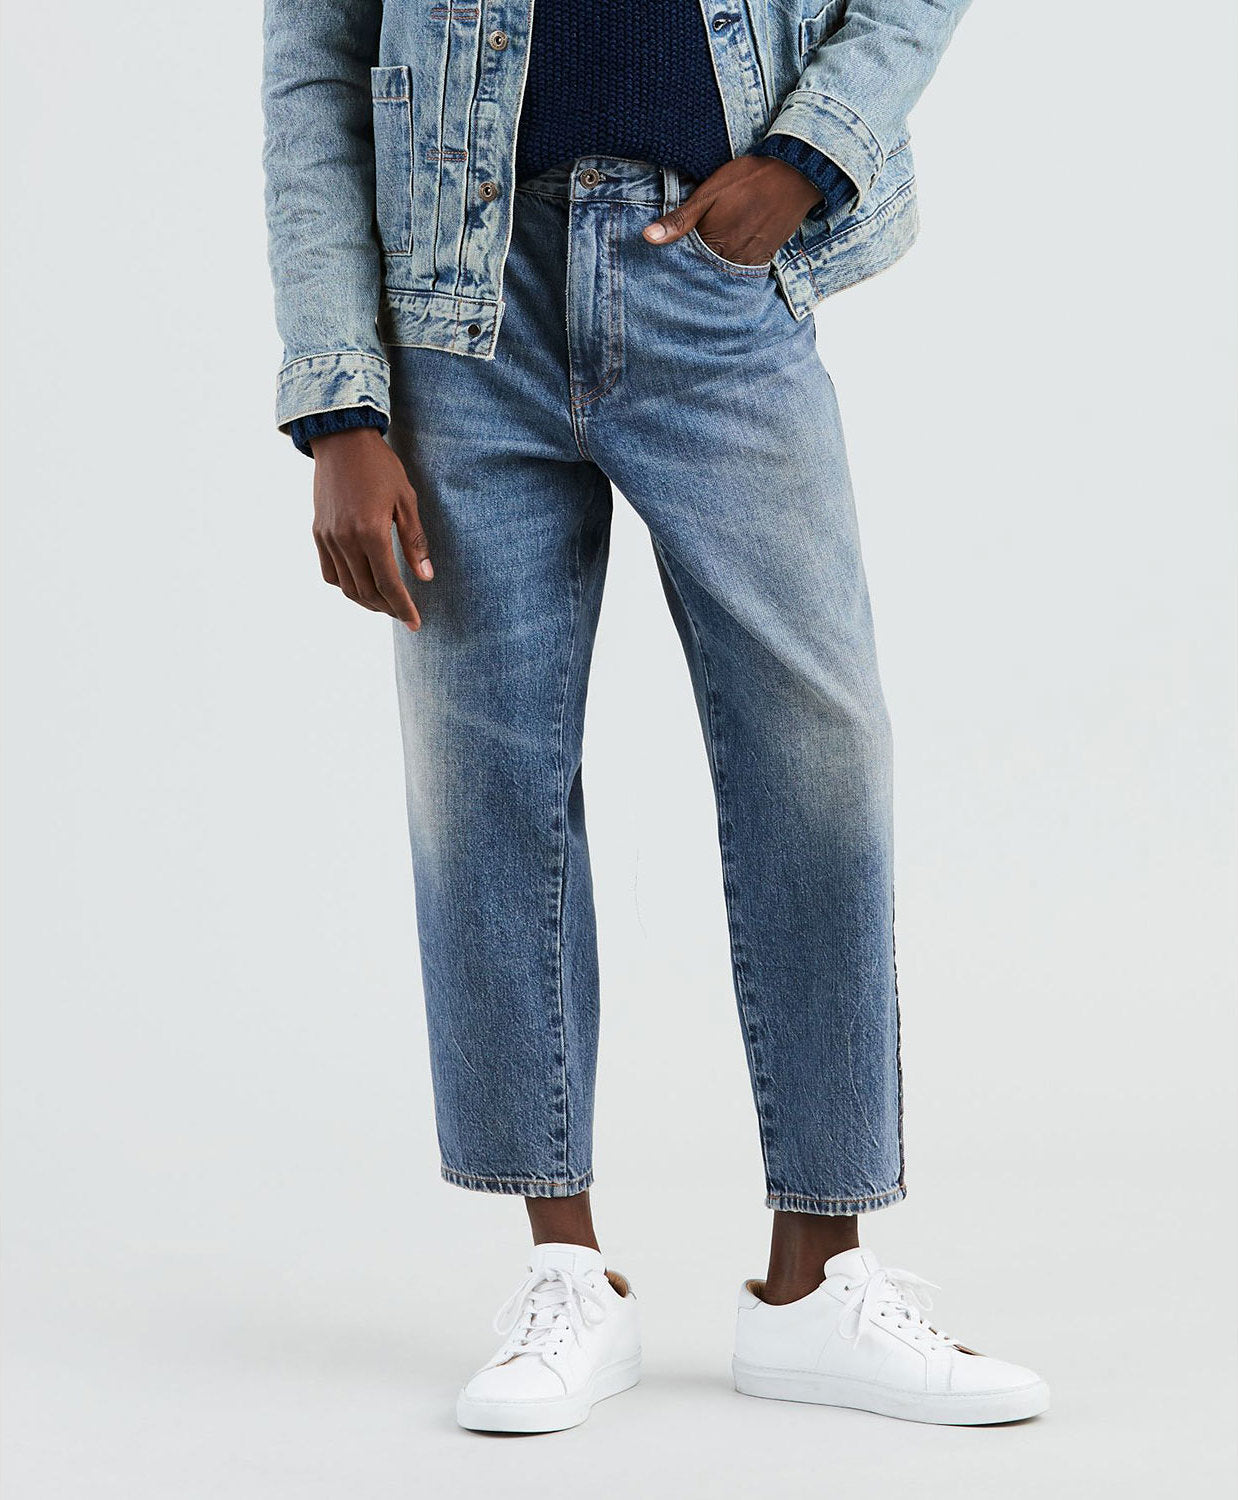 Levi's Made & Crafted Draft Taper Jeans - Men's | The Last Hunt